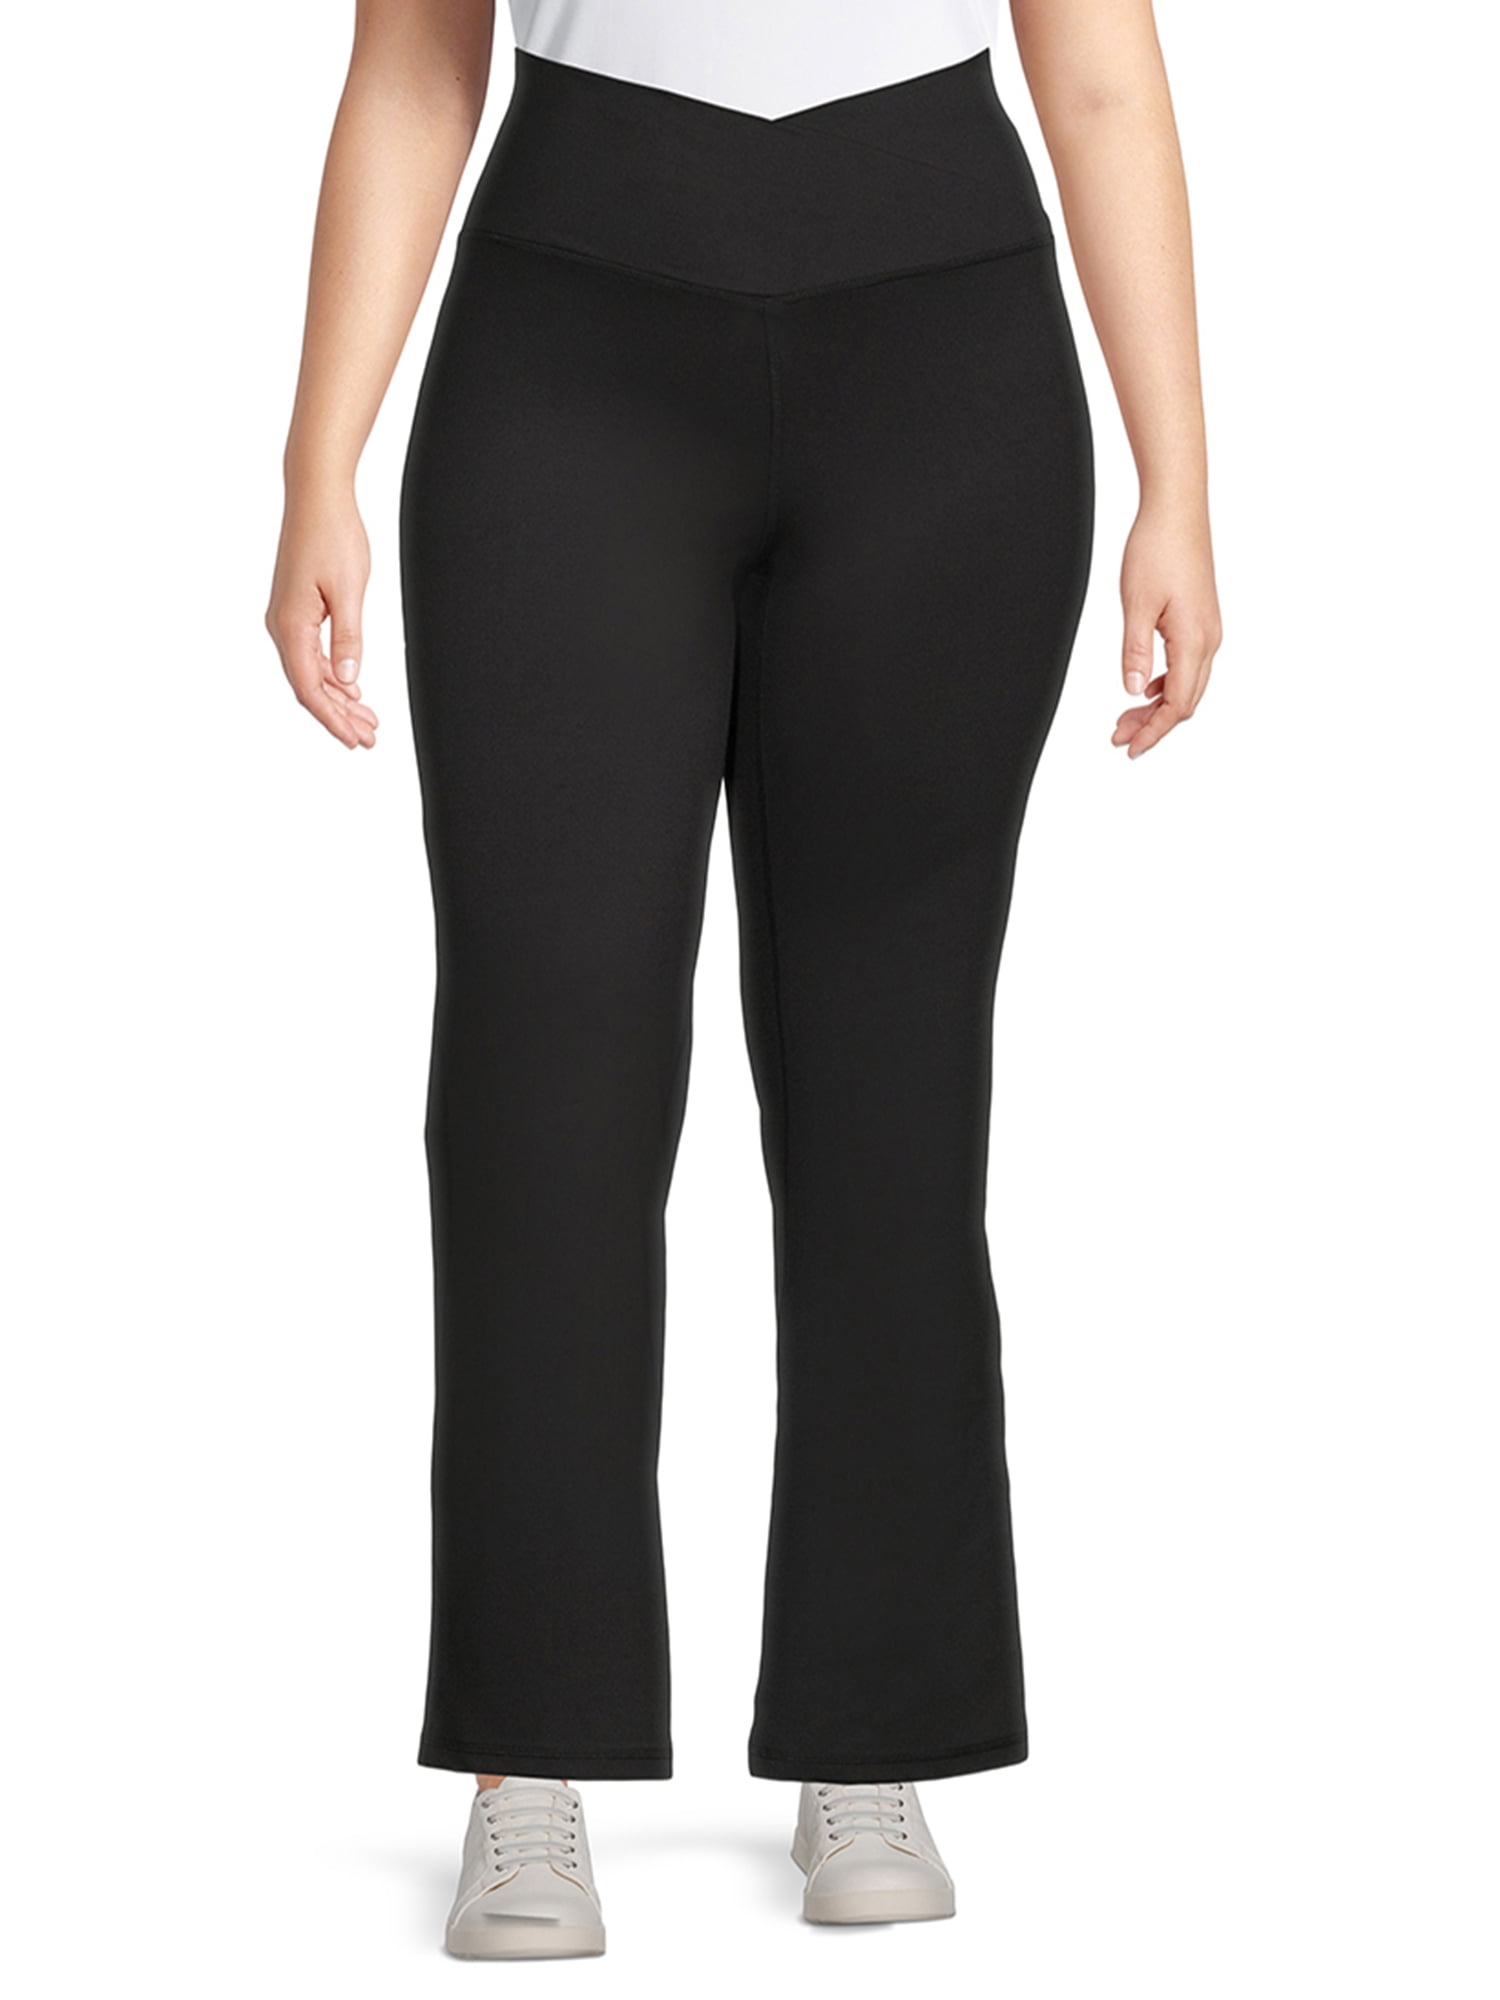 SEAOPEN Flare Leggings for Women Plus Size High Waisted Yoga Pants